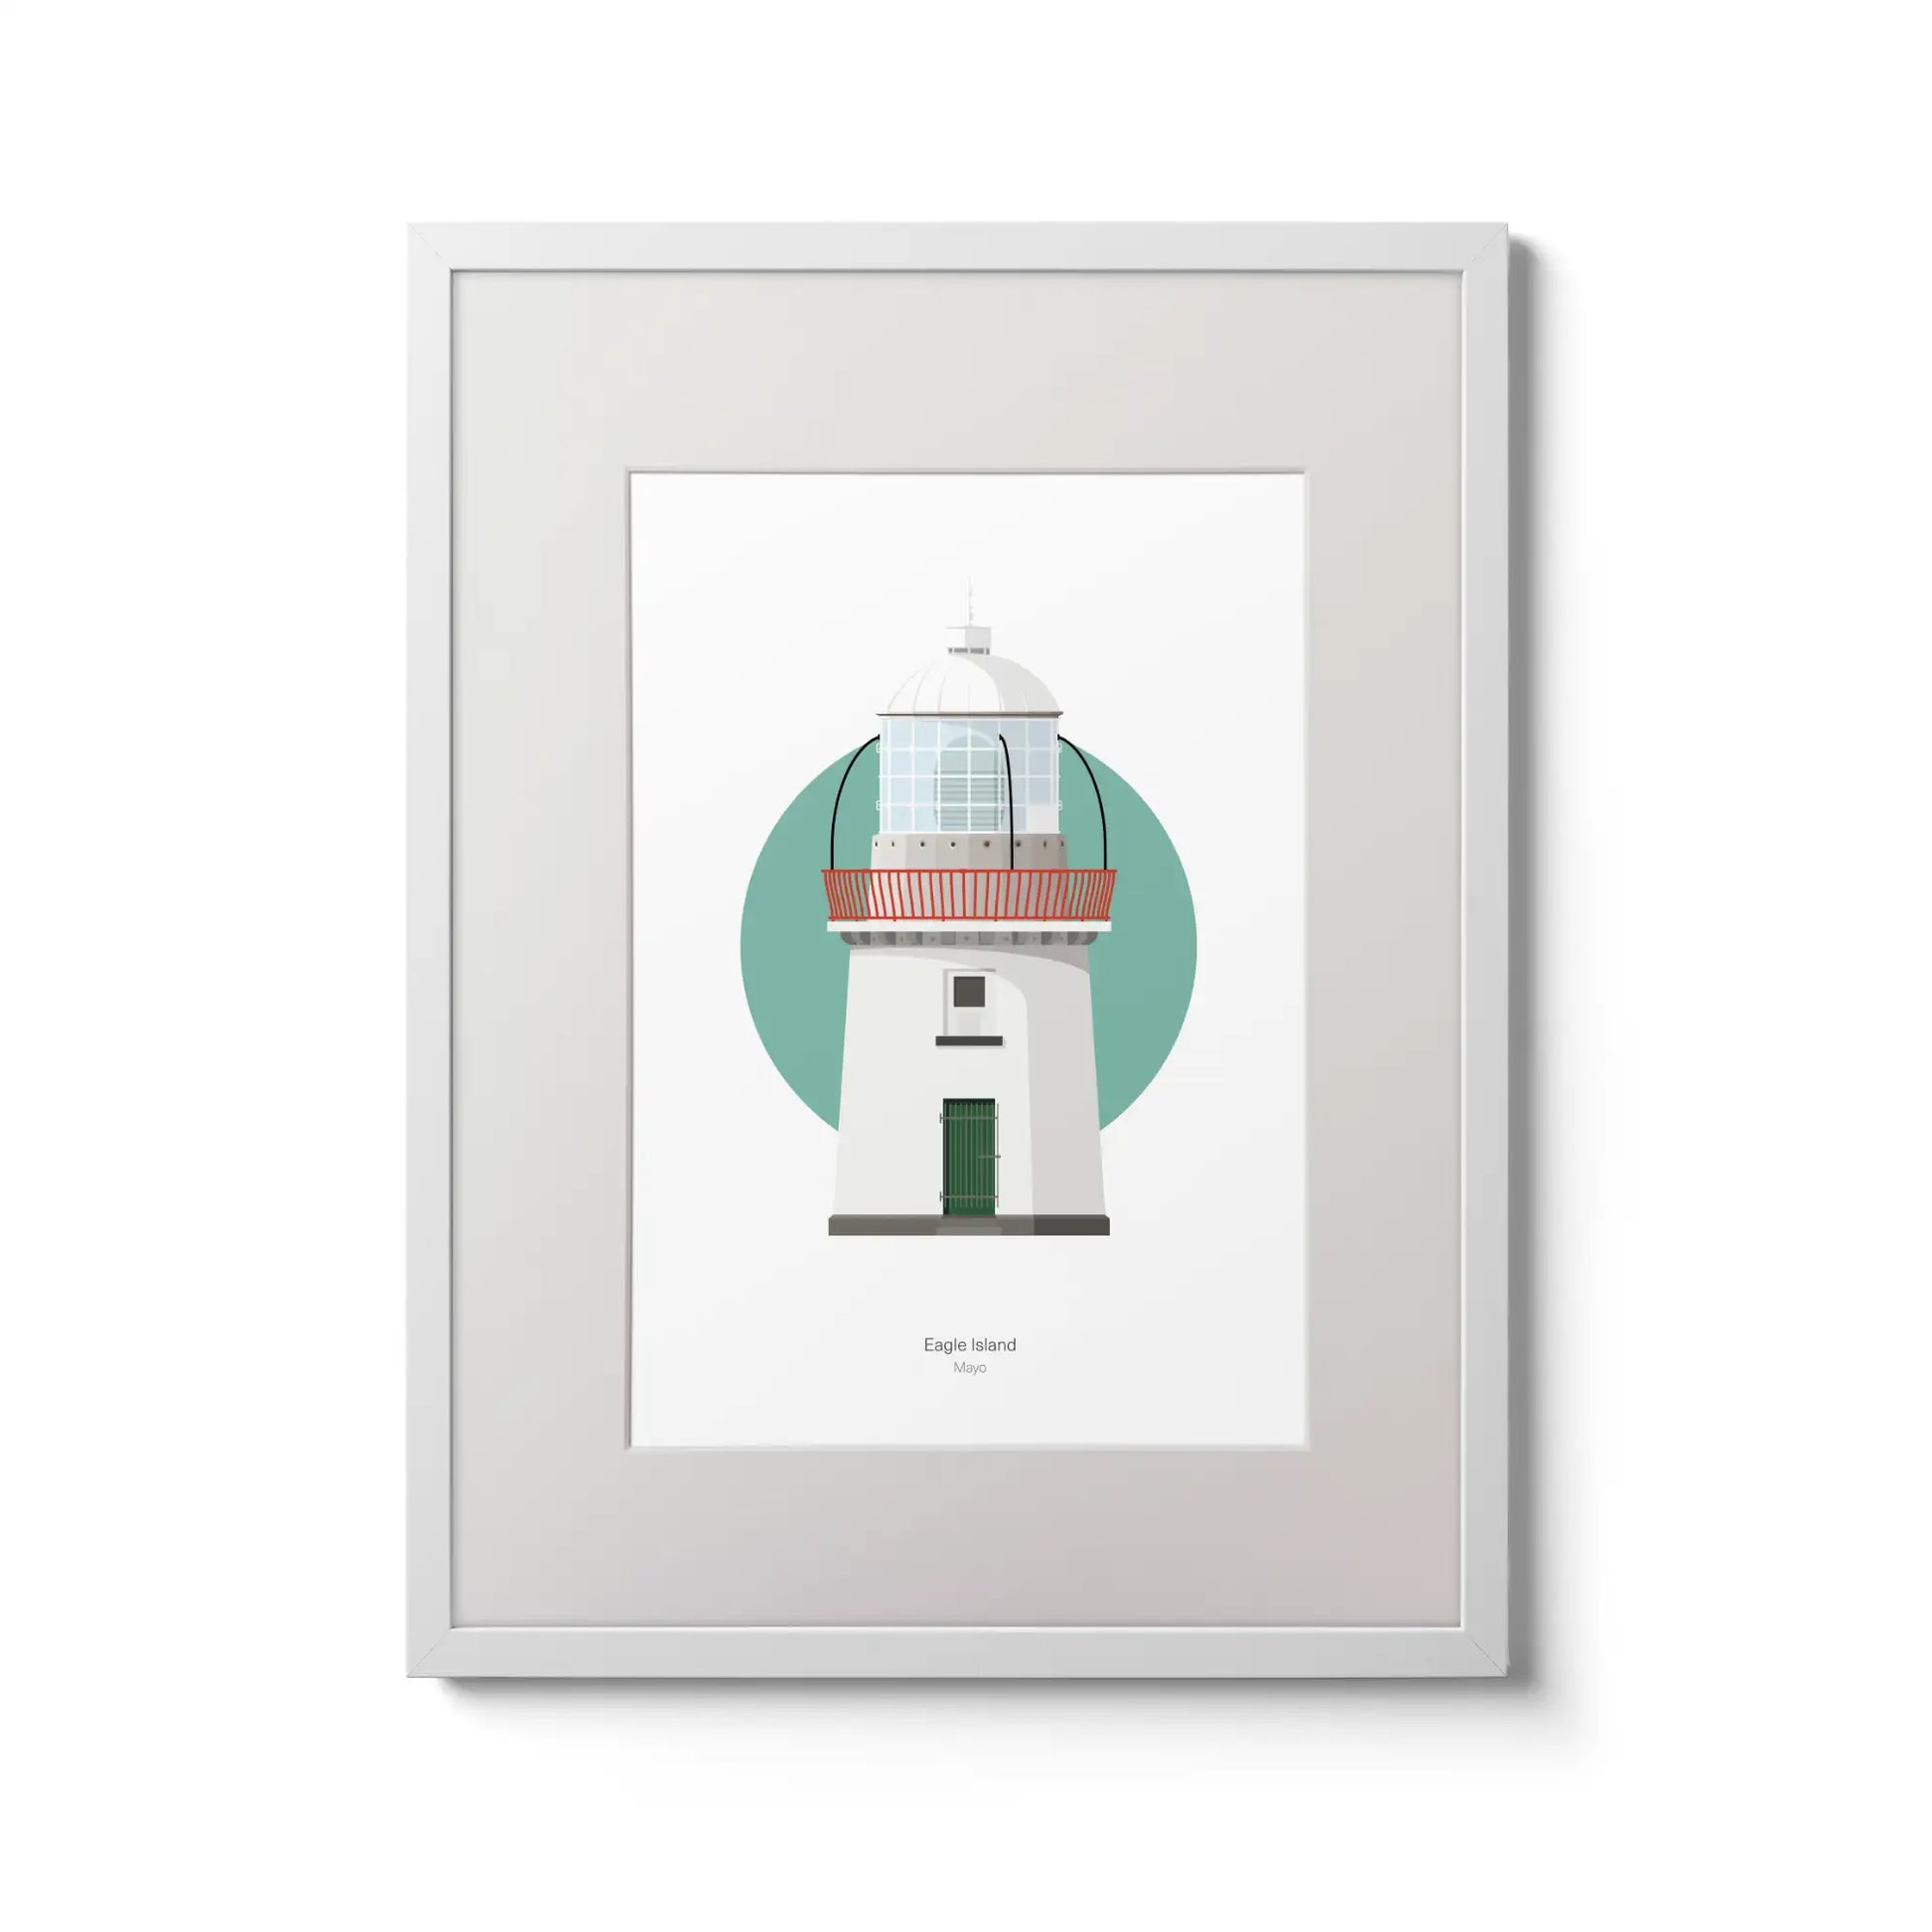 Contemporary wall art decor of Eagle Island lighthouse on a white background inside light blue square,  in a white frame measuring 30x40cm.